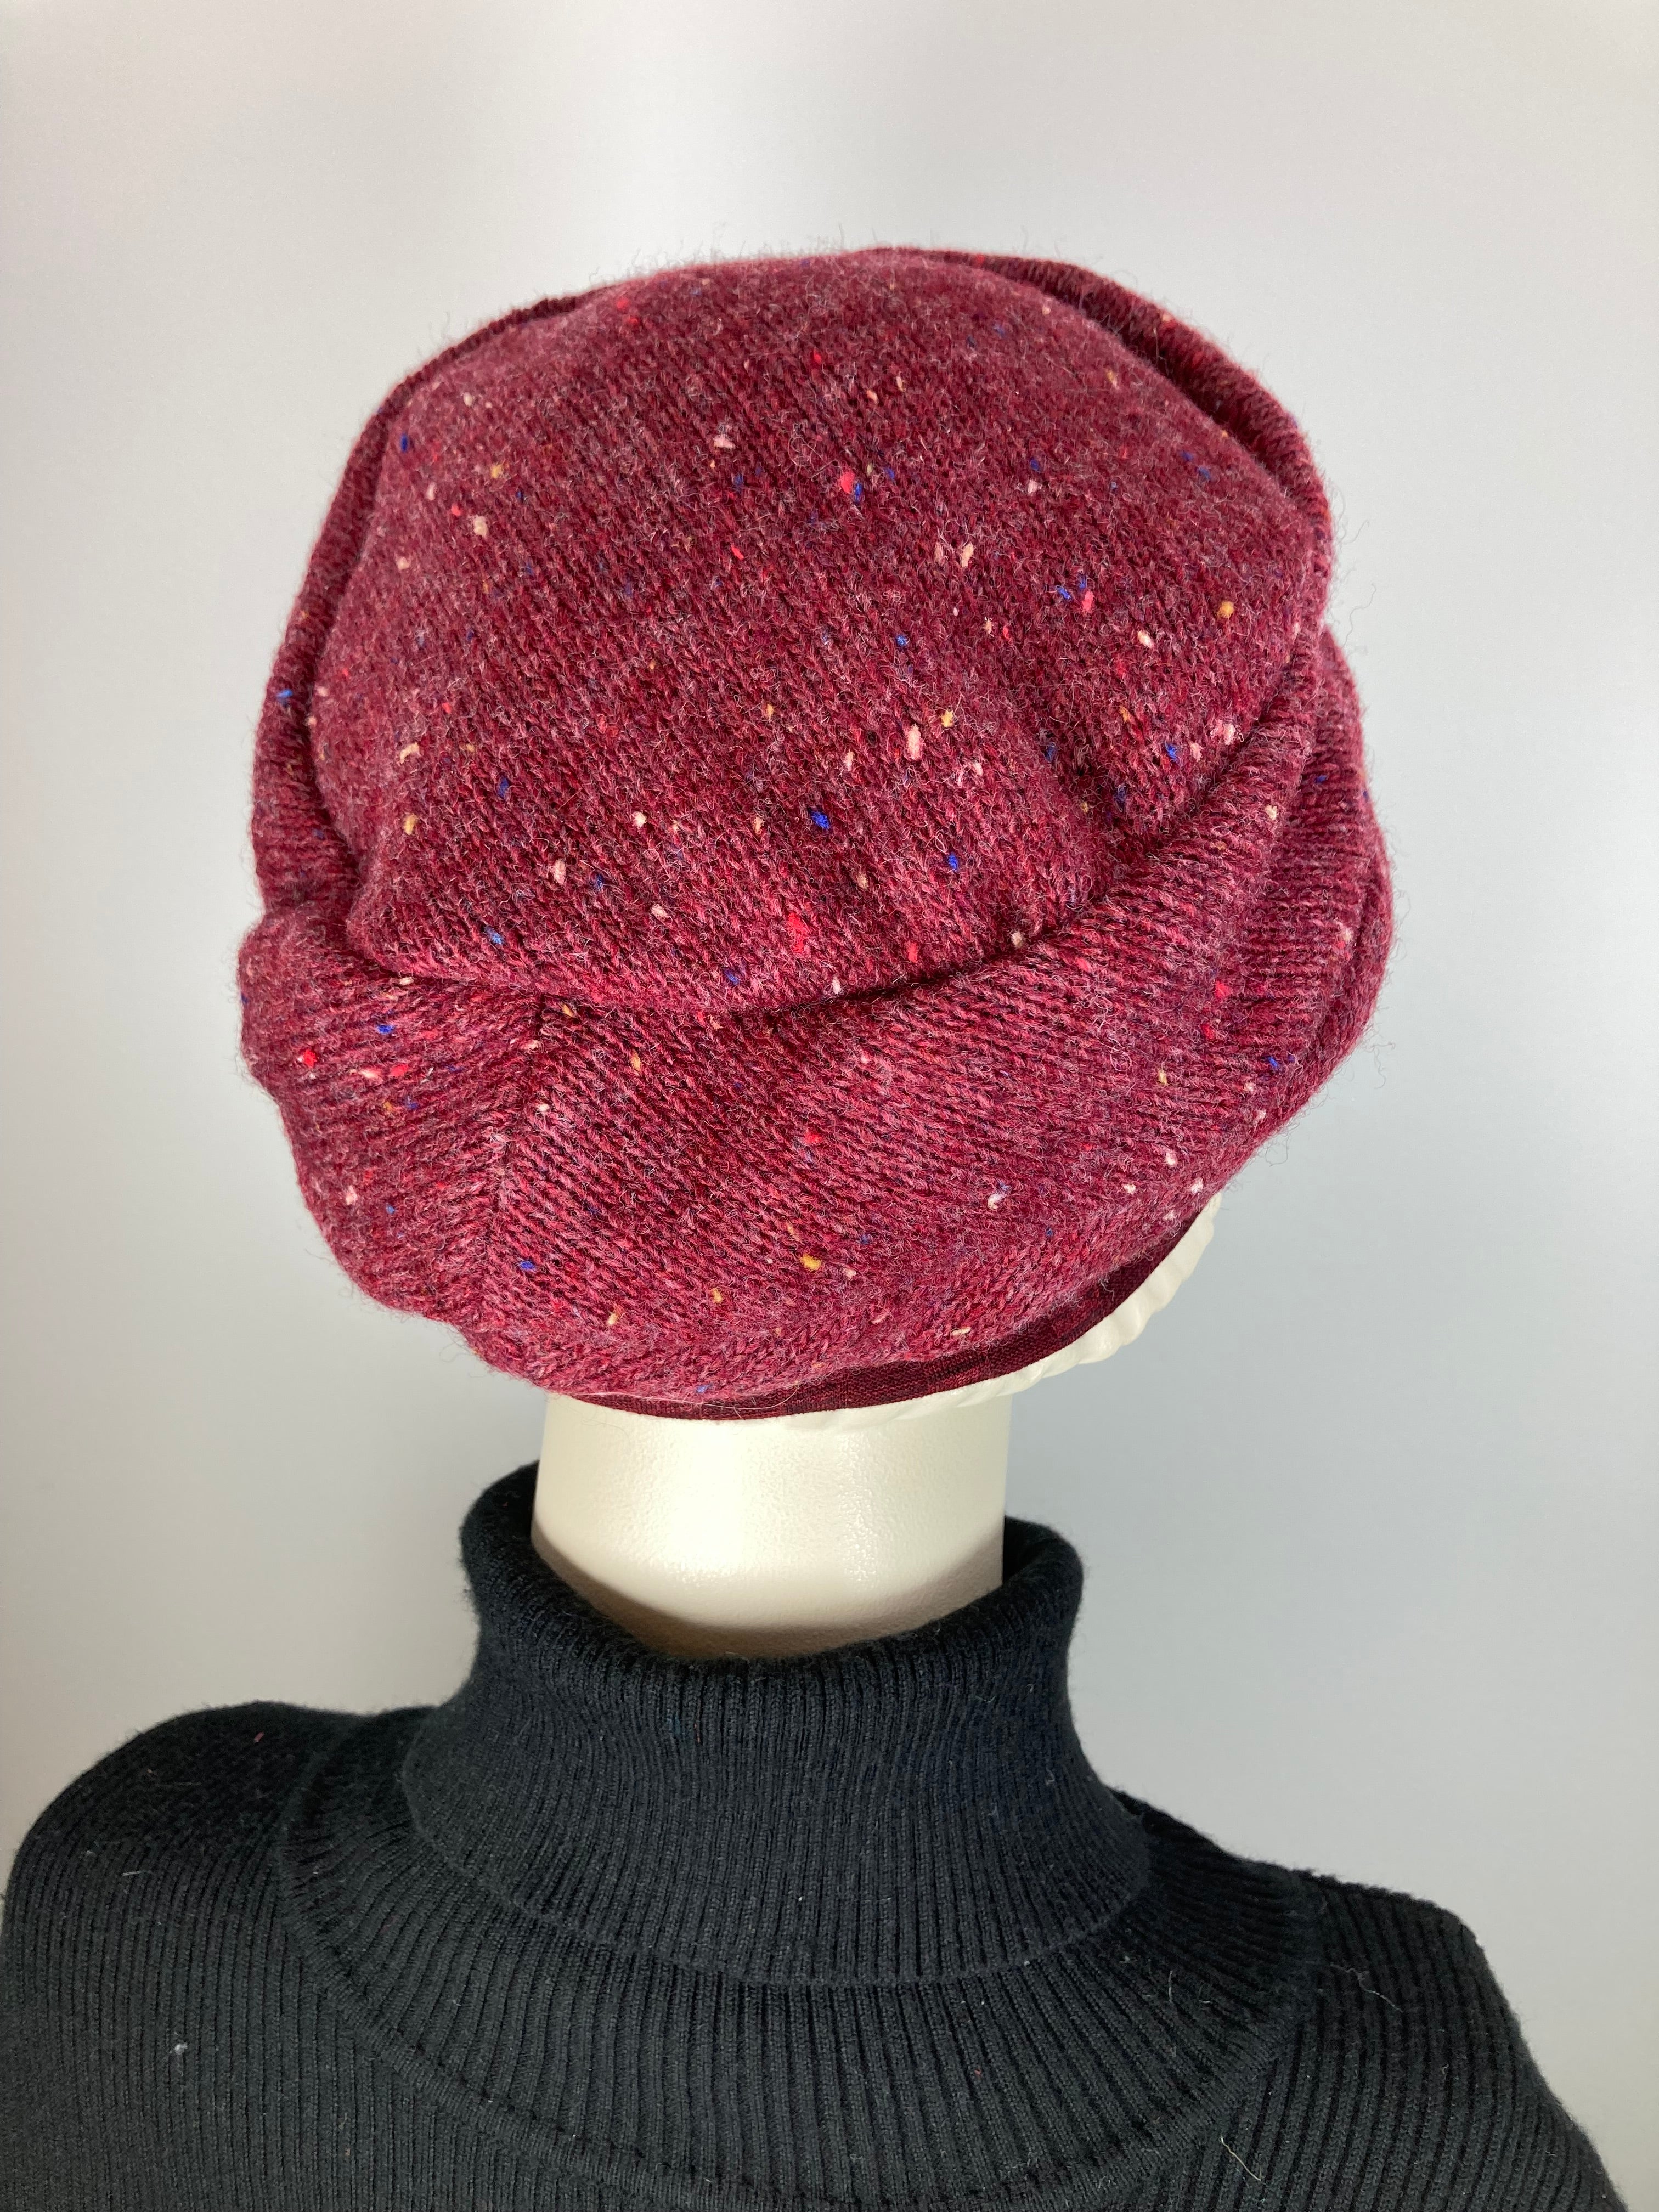 Womens Slouchy Beret. Knit burgundy Hat. Slouch Eco friendly Hat. Boho chic casual hat. Ladies travel hat. Stylish fabric hat. Sustainable